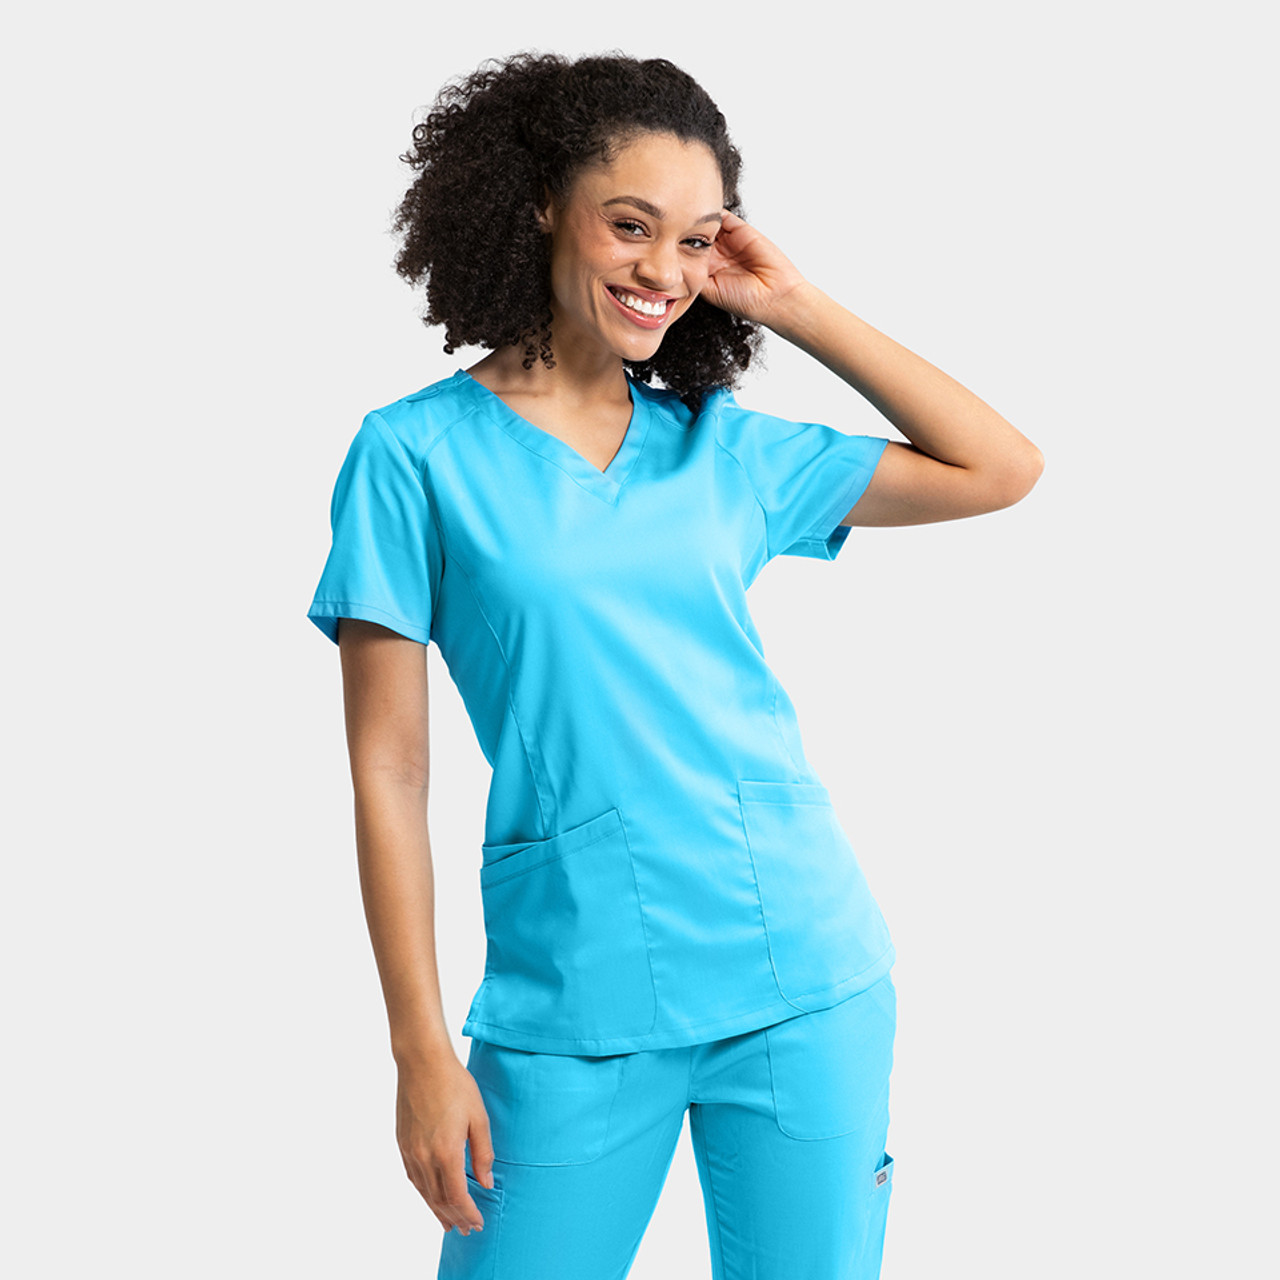 IRG EDGE Scrubs for the Busy Healthcare Professional